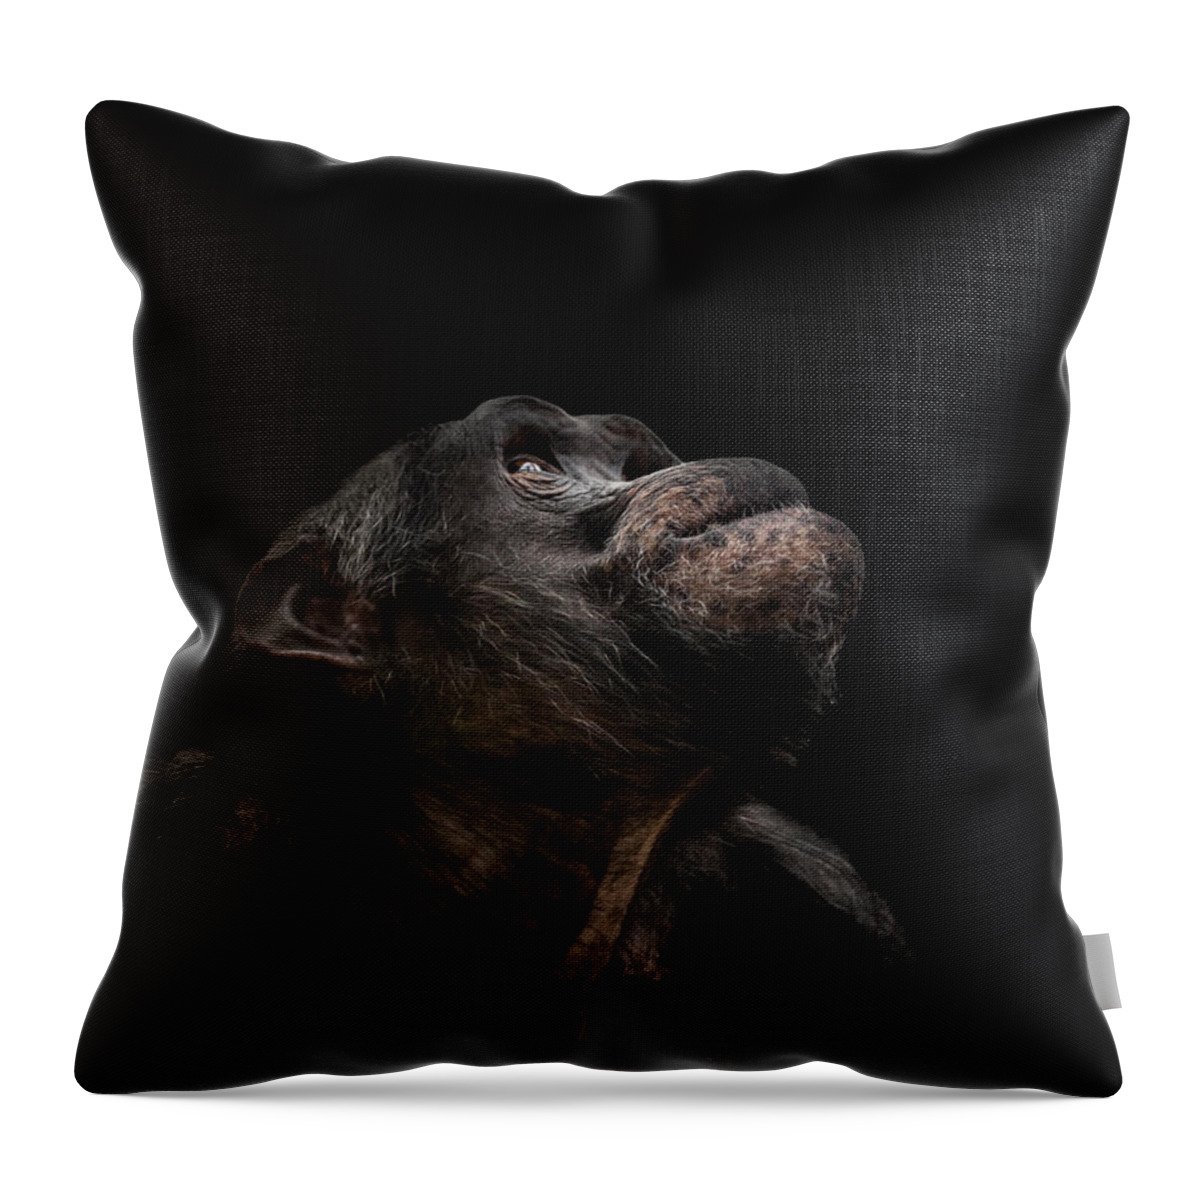 Chimpanzee Throw Pillow featuring the photograph The Stargazer by Paul Neville